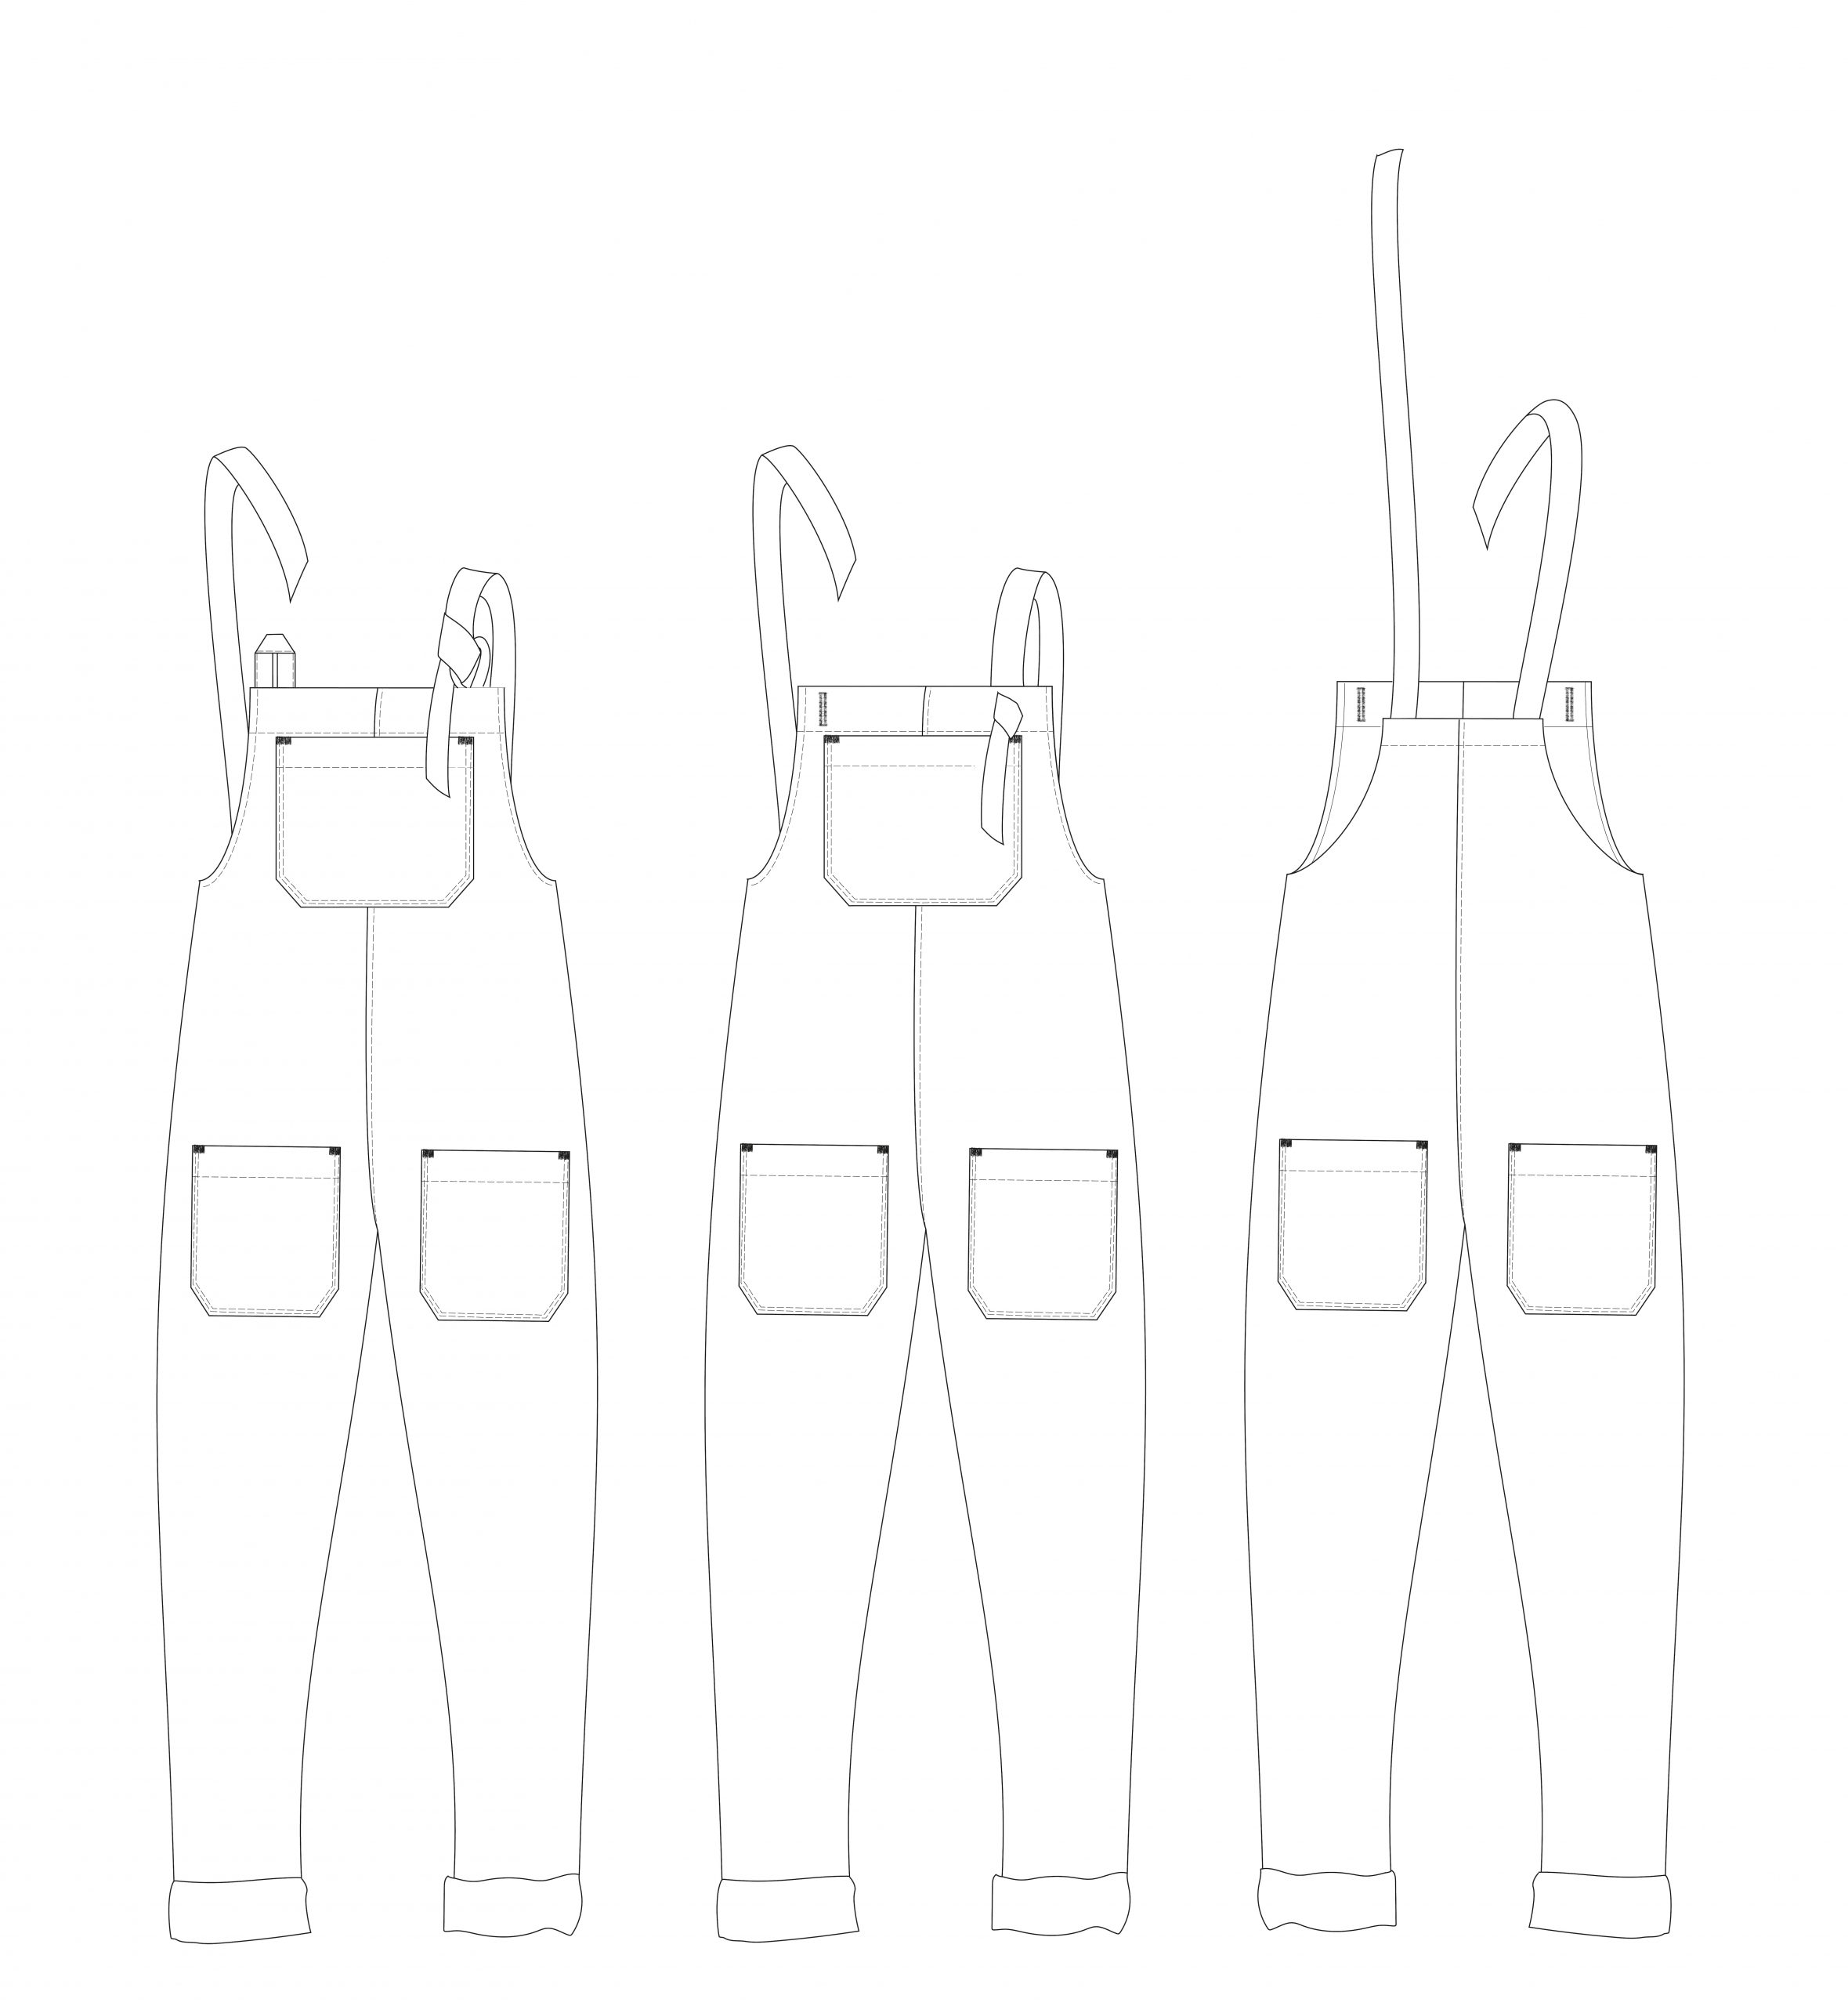 Waves & Wild Baby/Child Heyday Dungarees - The Fold Line